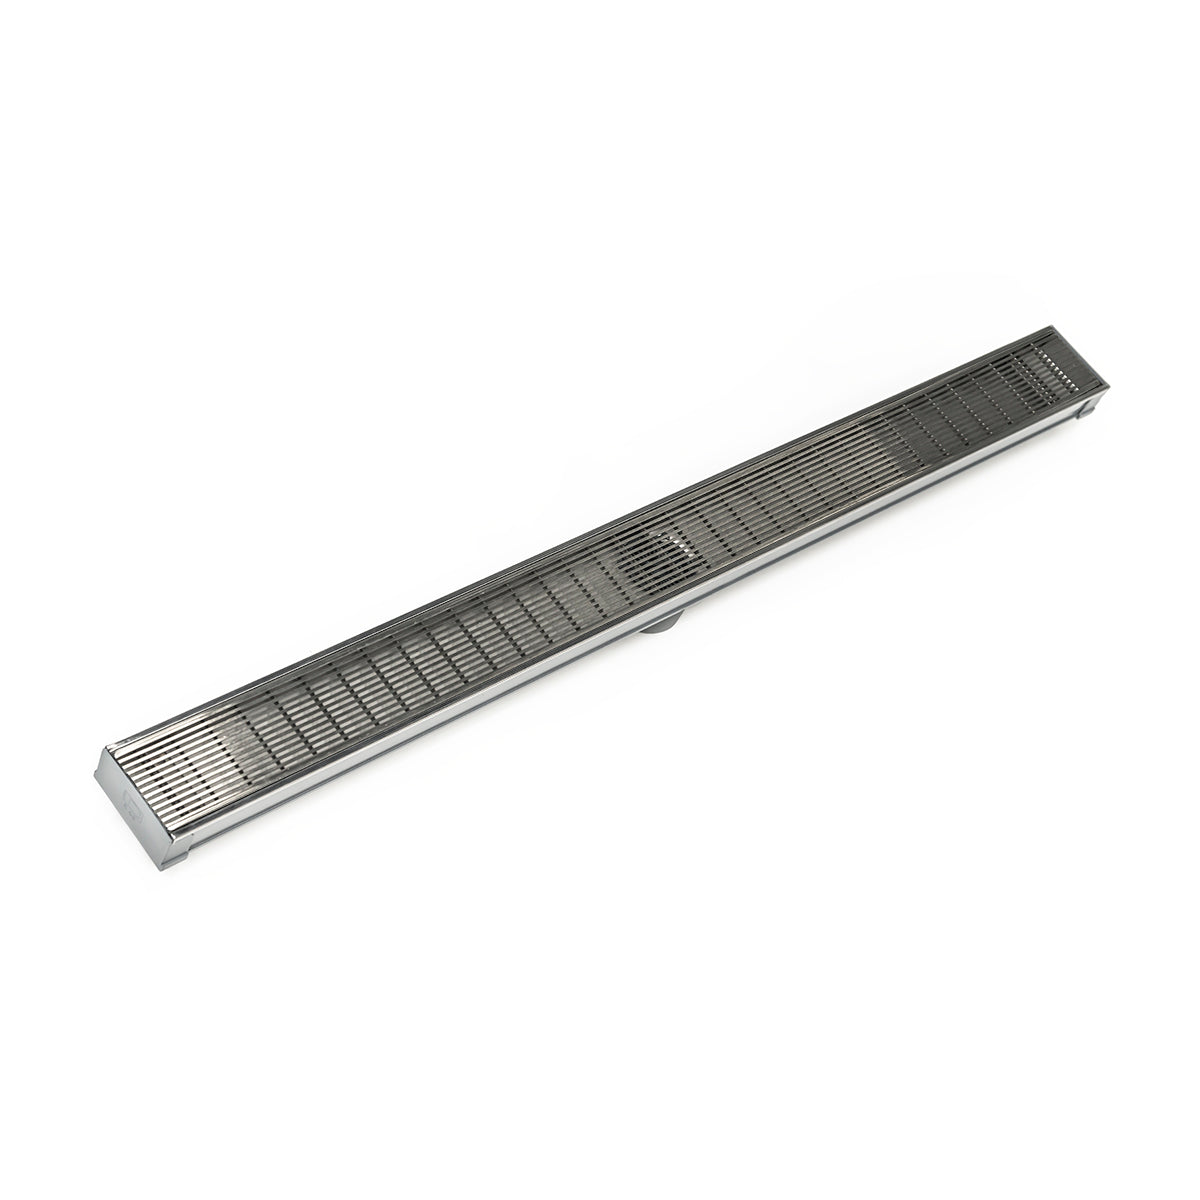 Infinity Drain 72" S-PVC Series Low Profile Site Sizable Linear Drain Kit with 2 1/2" Wedge Wire Grate